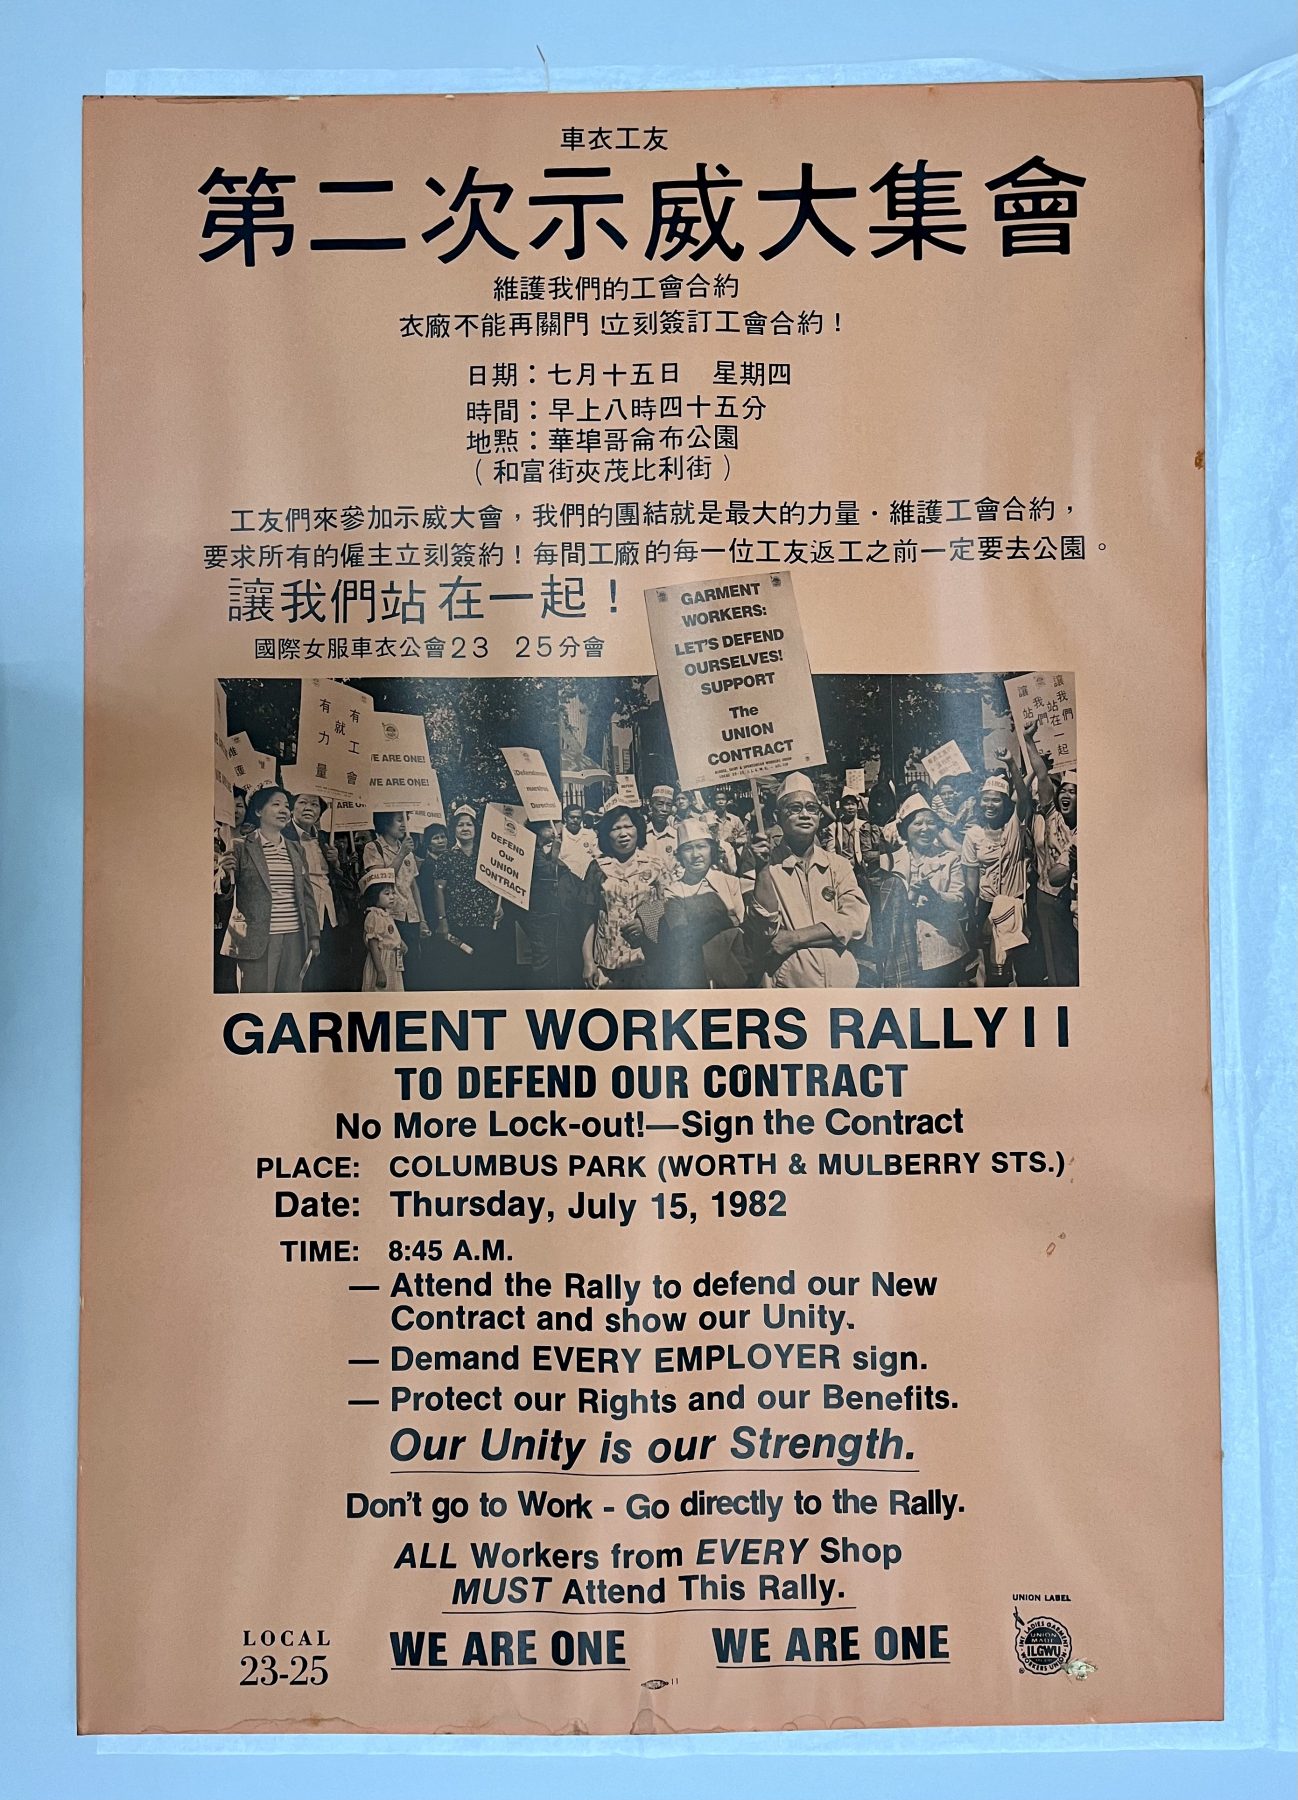 2010.040.027 Garment workers strike poster calling ILGWU members and supporters to rally at Columbus Park on Thursday, July 15, 1982 to defend their union contracts. Black ink printed on orange-colored background. 20 in. x 29 in. Museum of Chinese in America (MOCA) Chinese Sportswear Workers Social Association Collection.